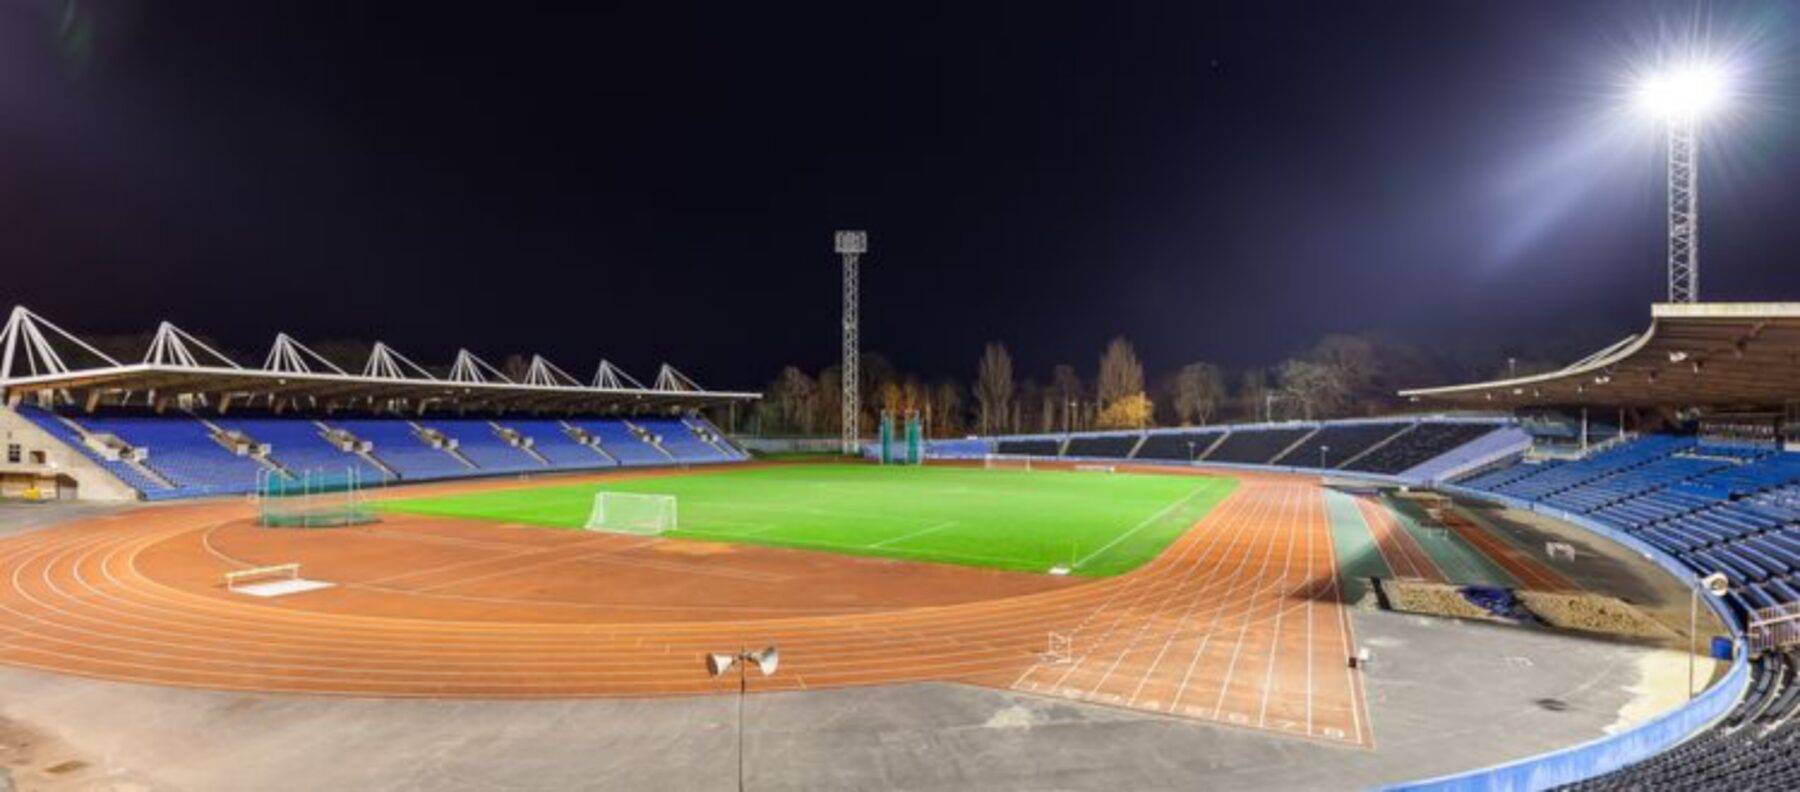 Facility Image Crop Crystal Palace National Sports Centre 02 02 2016 42